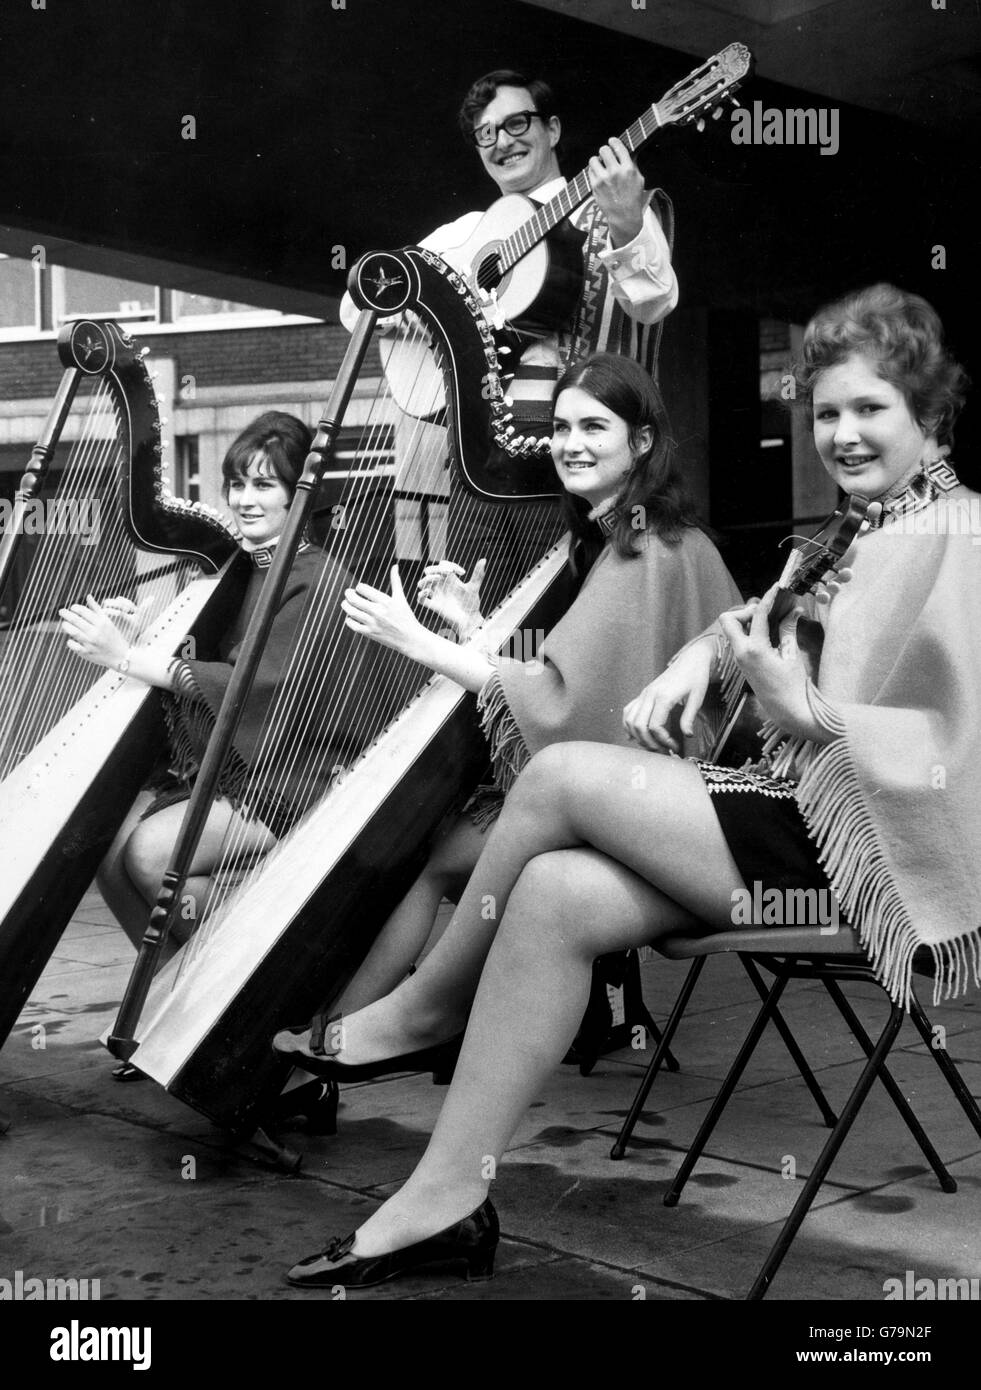 Los Picaflores (The Humming Birds). Terry Barratt, 25, and his sisters (l-r) Rosemary, 21, Hilary, 19 and Patricia, 16. They are about to embark on a nationwide tour, performing at 32 rallies for the South American Missionary Society. Stock Photo